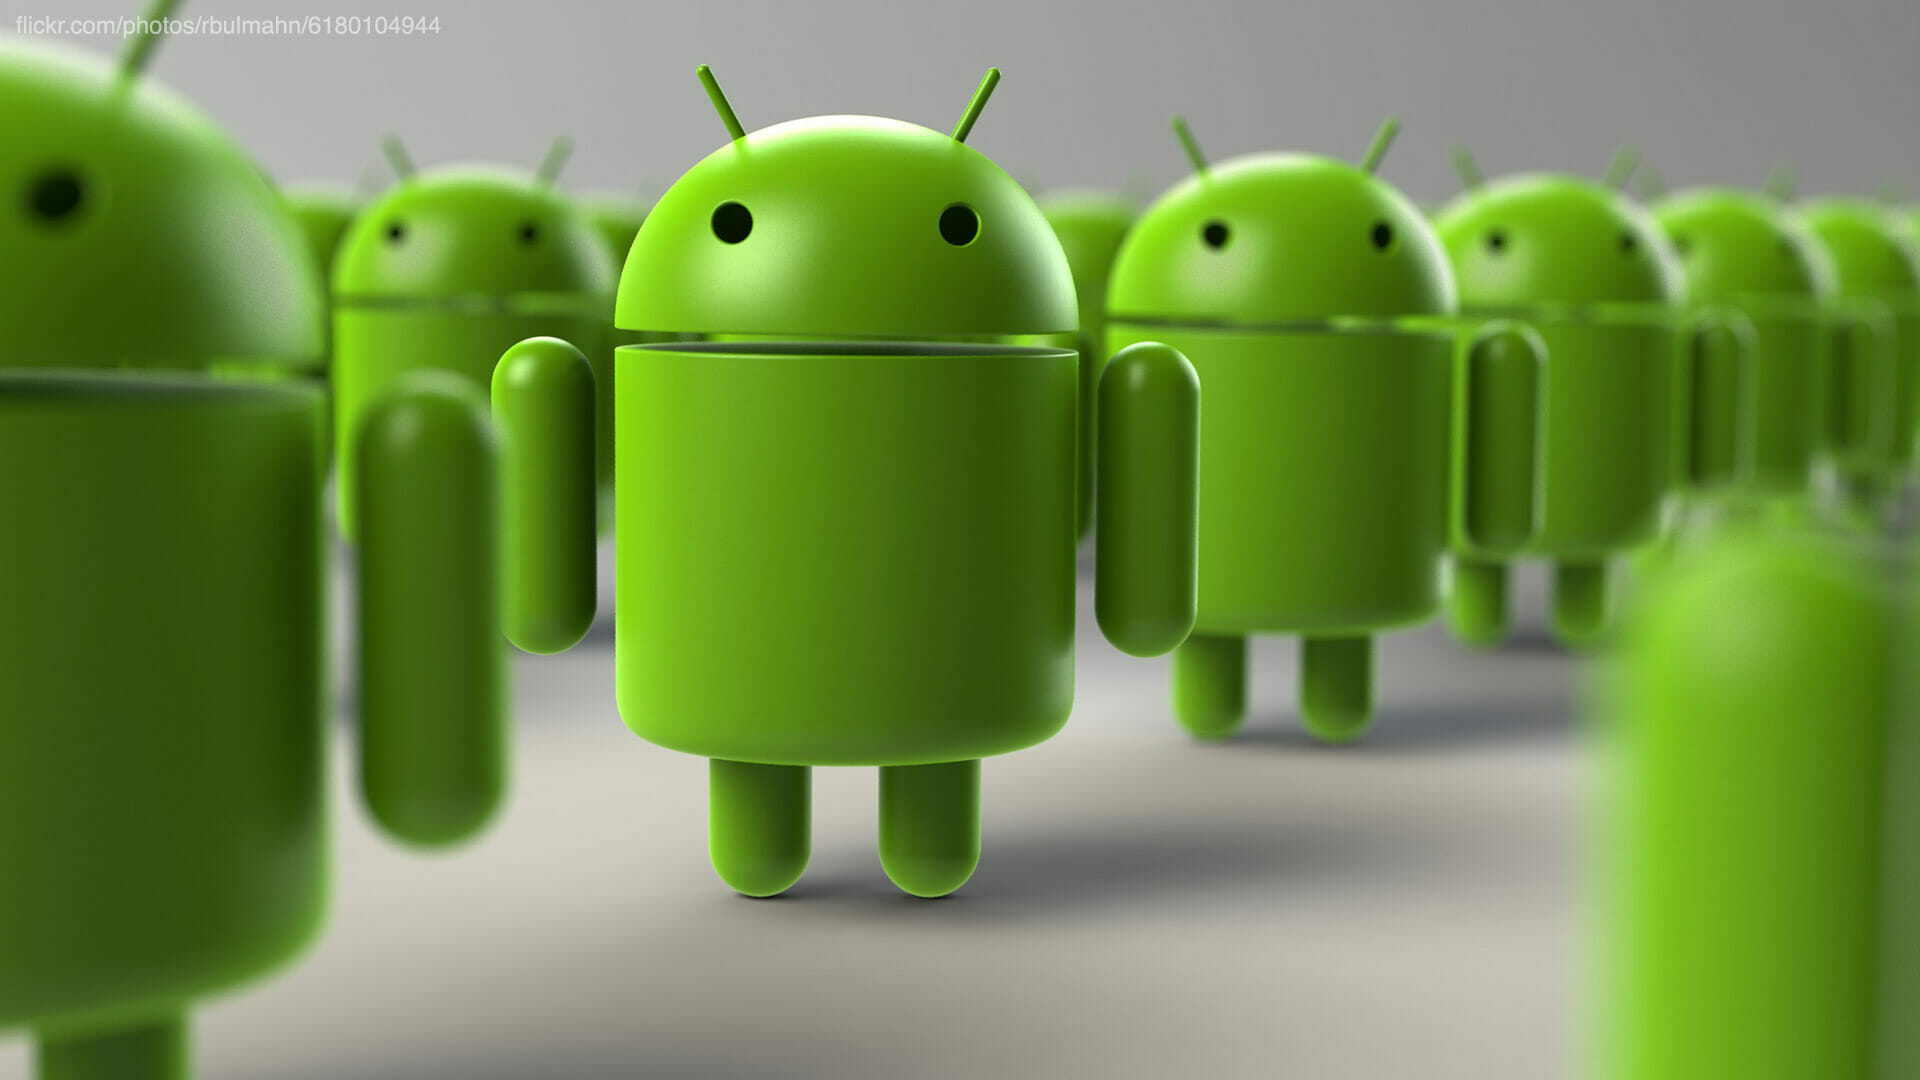 Here comes the Android Privacy Sandbox